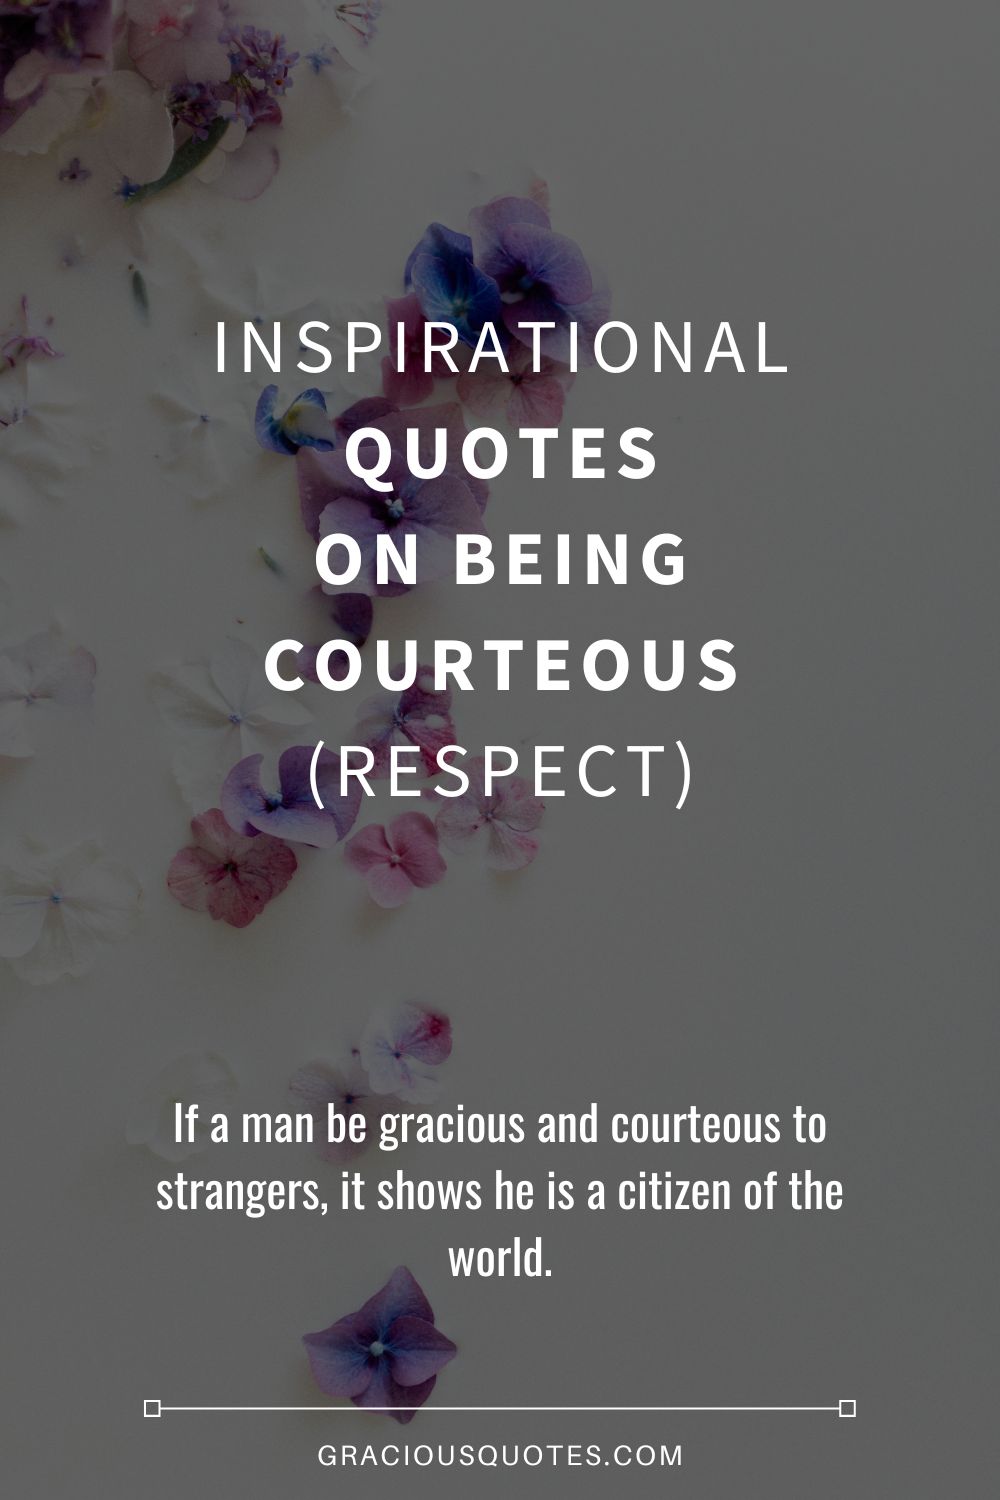 Inspirational Quotes on Being Courteous (RESPECT) - Gracious Quotes